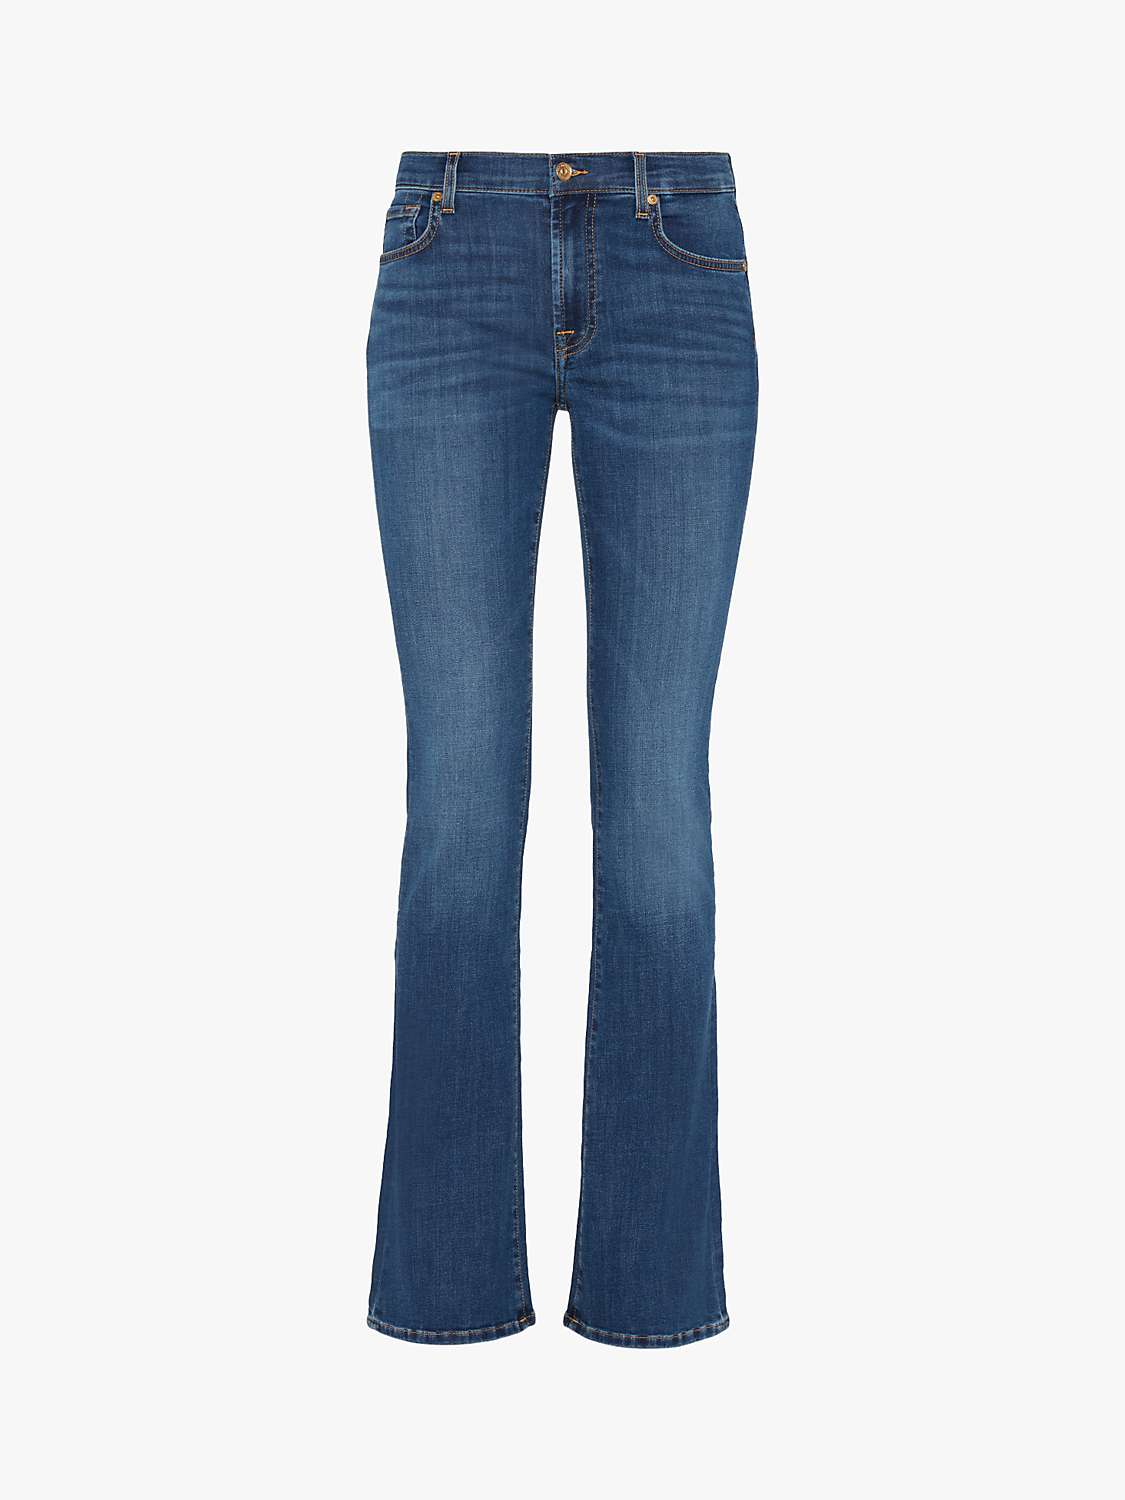 Buy 7 For All Mankind B(Air) Bootcut Jeans, Duchess Online at johnlewis.com